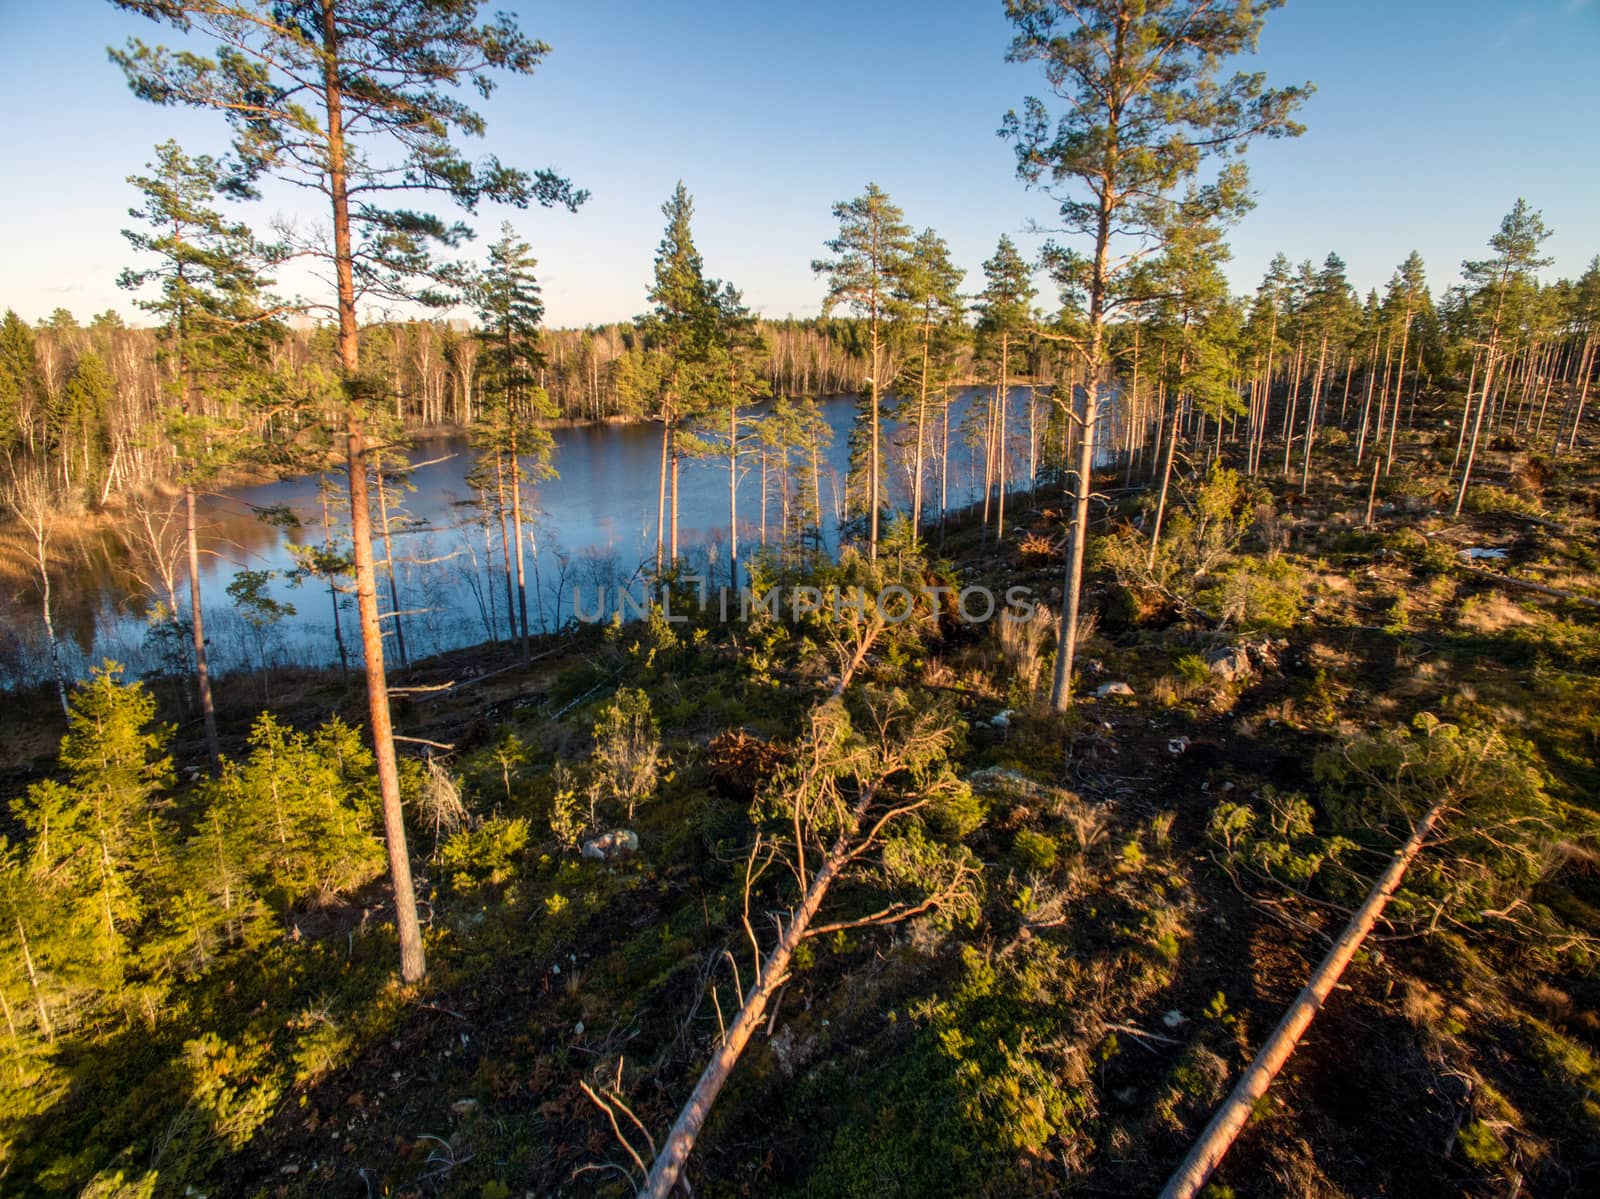 A lake can be seen throug the trees